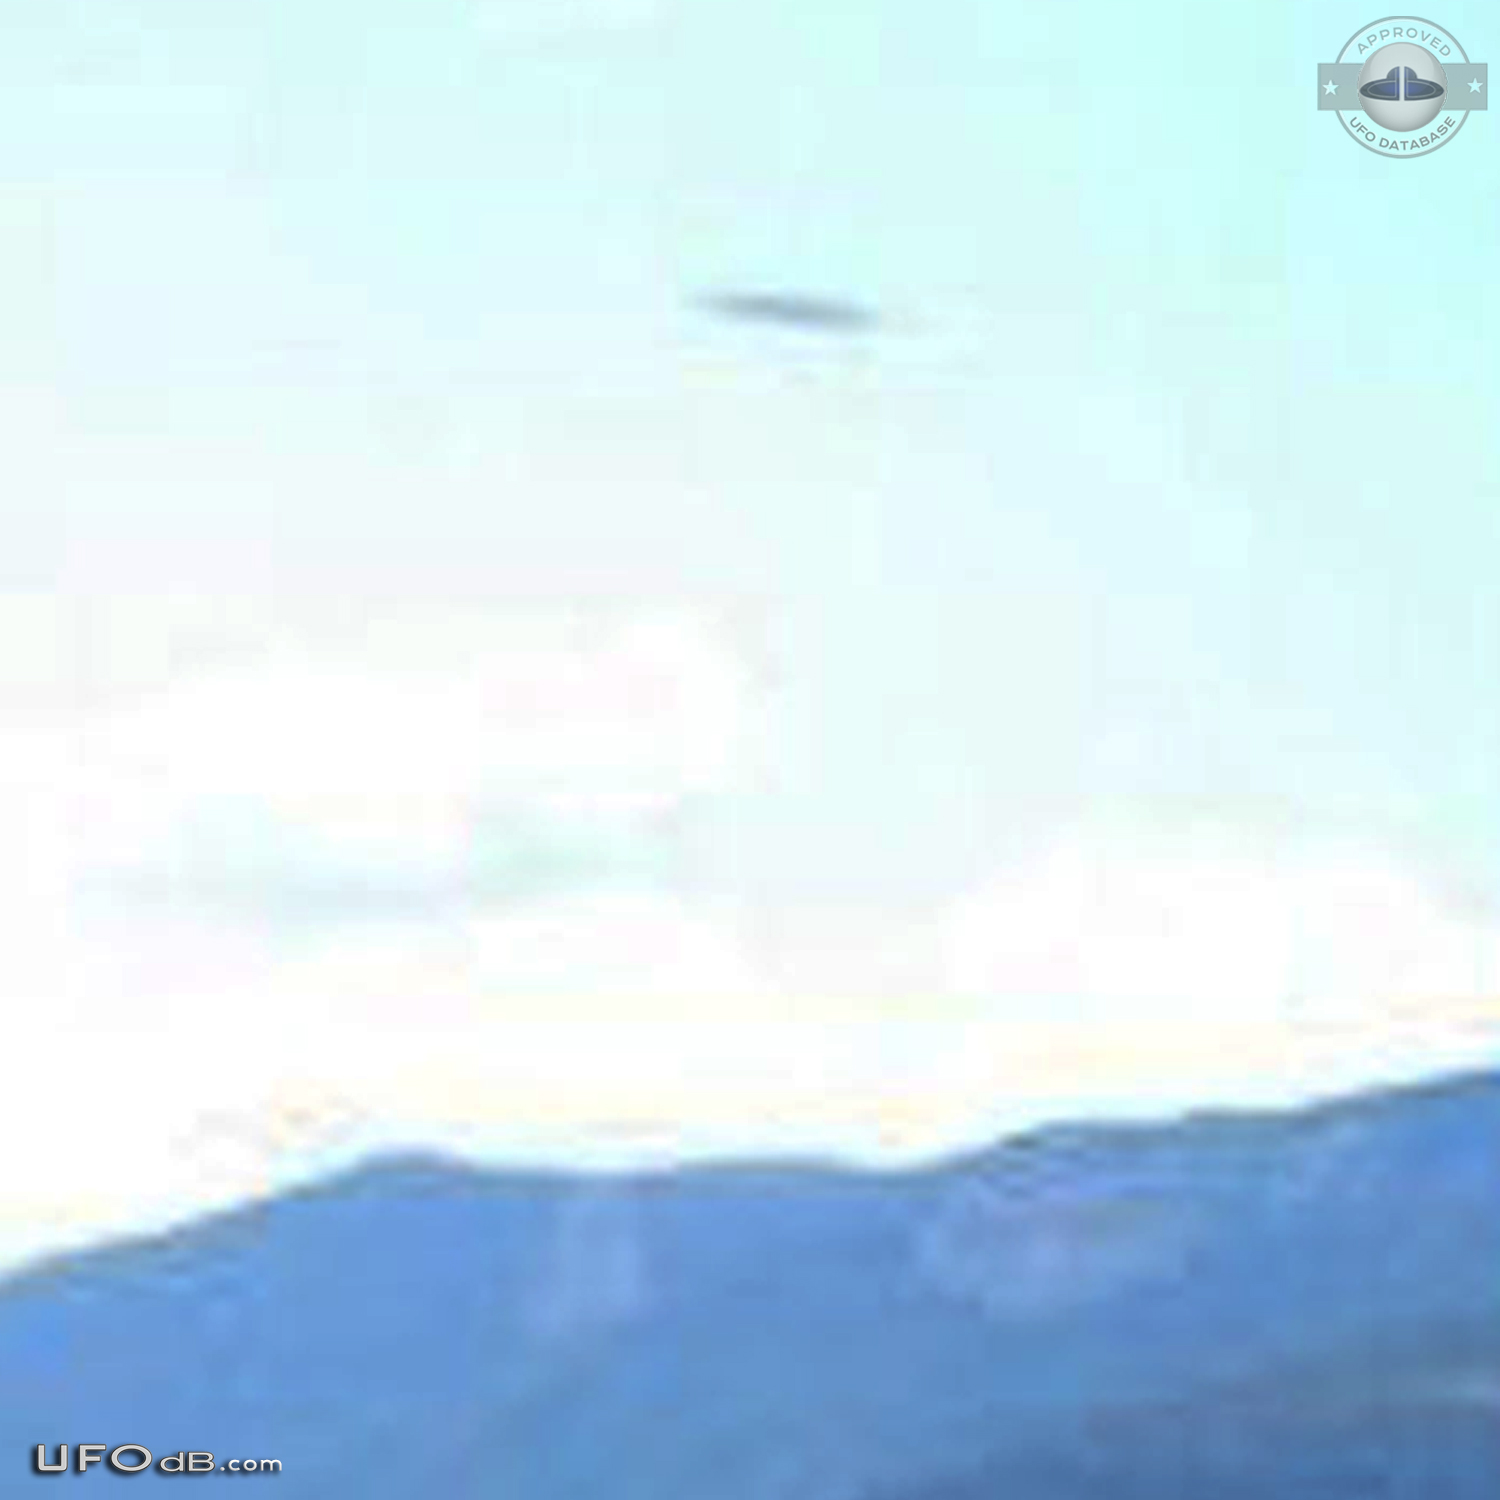 UFO picture showing saucer near Delphi Greece caught in June 3 2012 UFO Picture #449-4